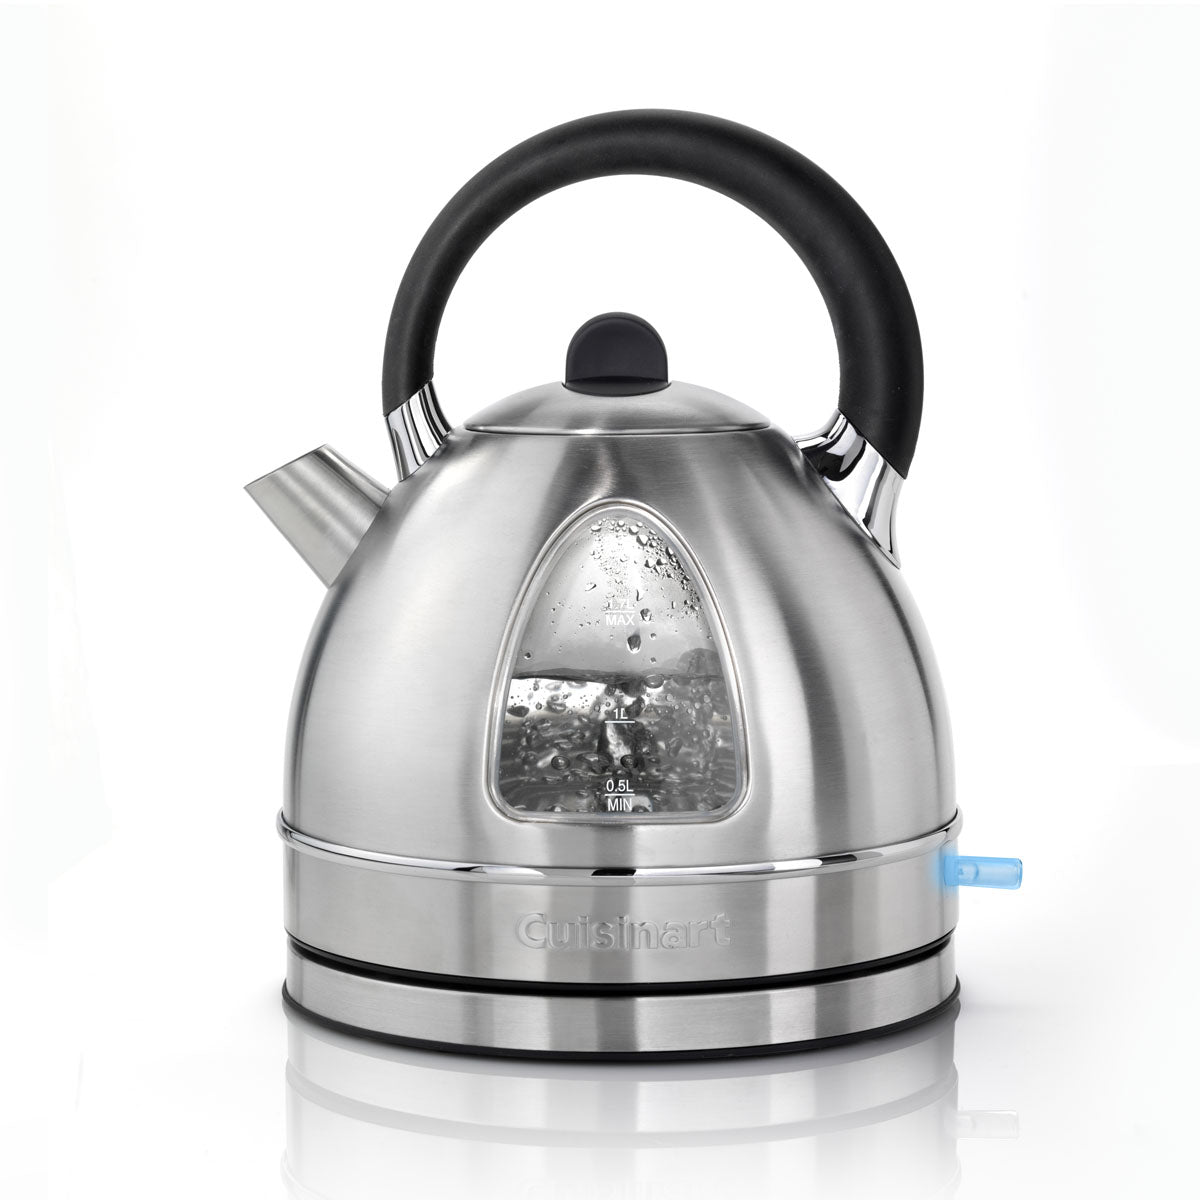 Image of Cuisinart Signature Collection Traditional Kettle in Brushed Steel